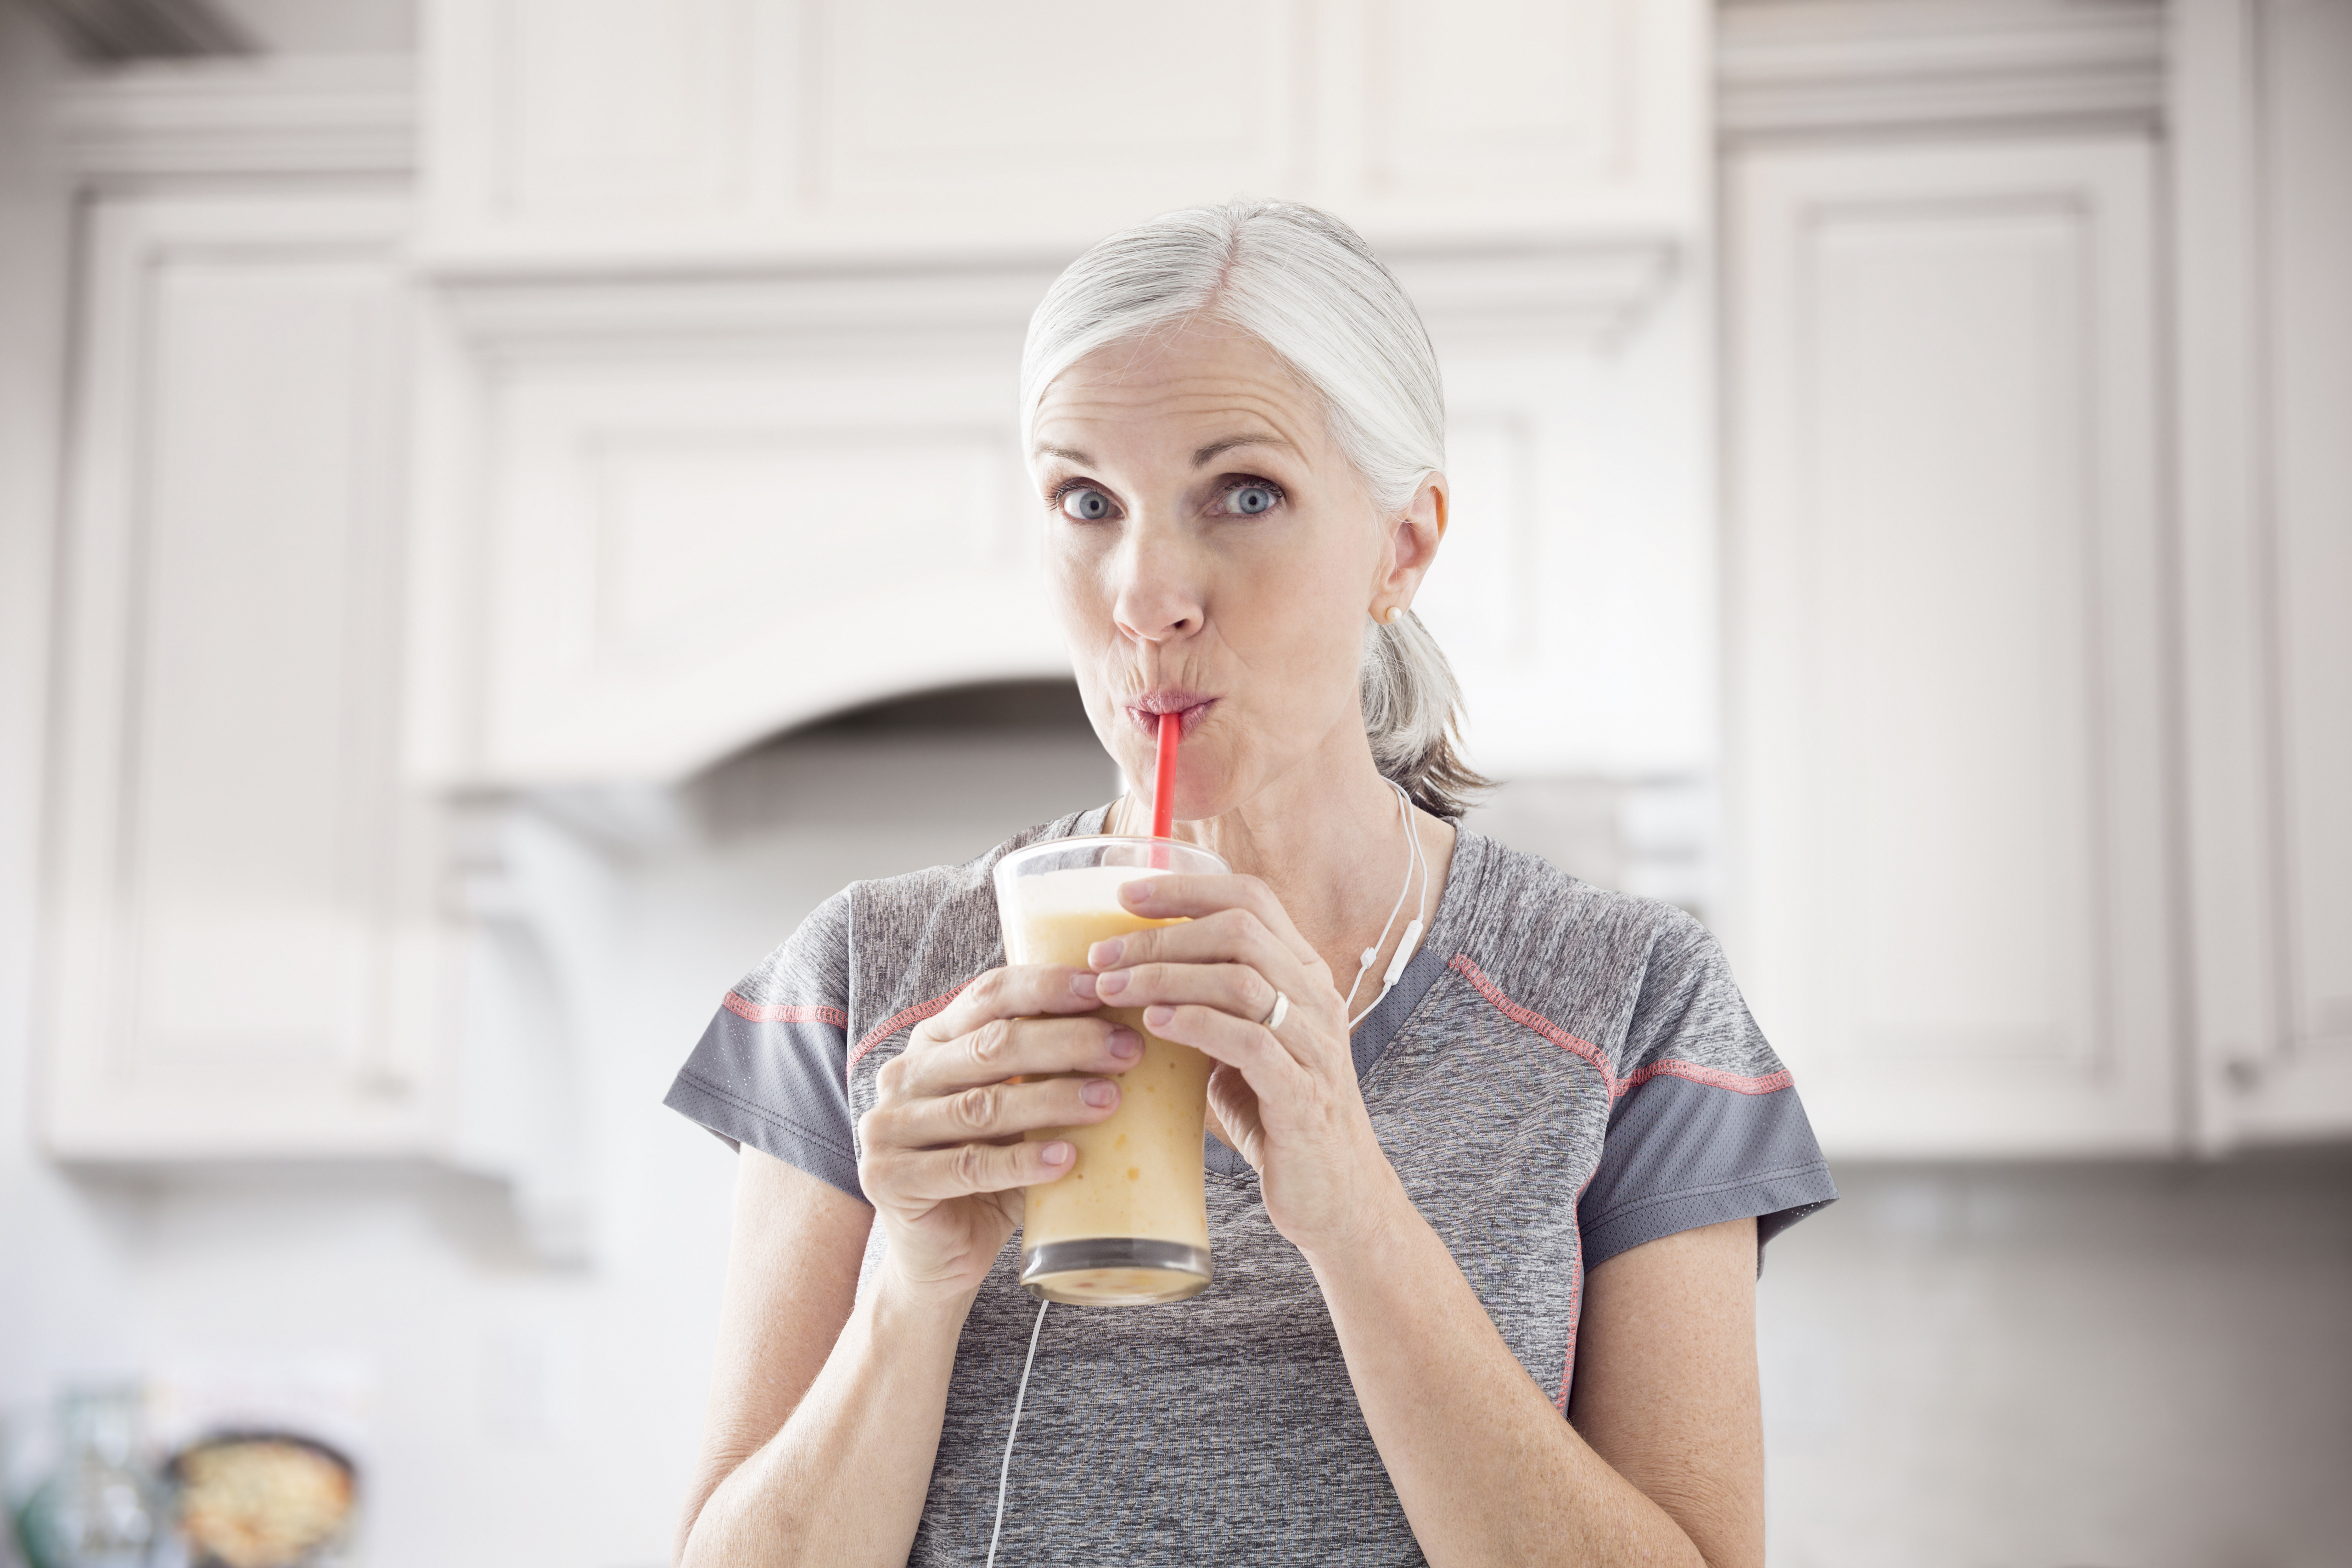 10 Best Meal Replacement Shakes for Women Over 50